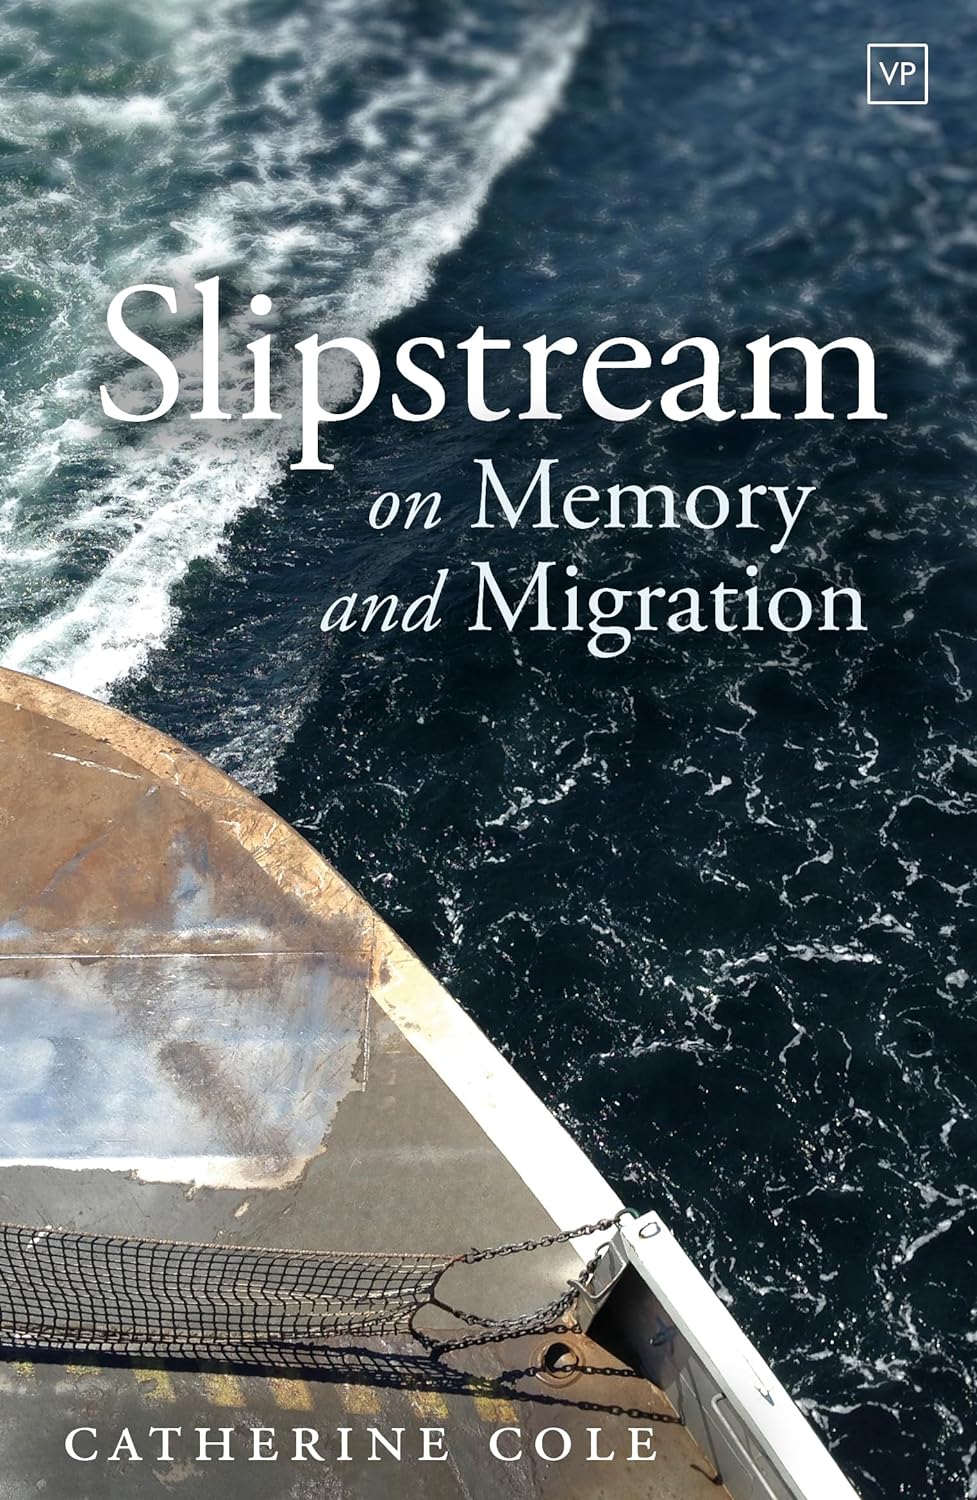 Slipstream: On memory and migration